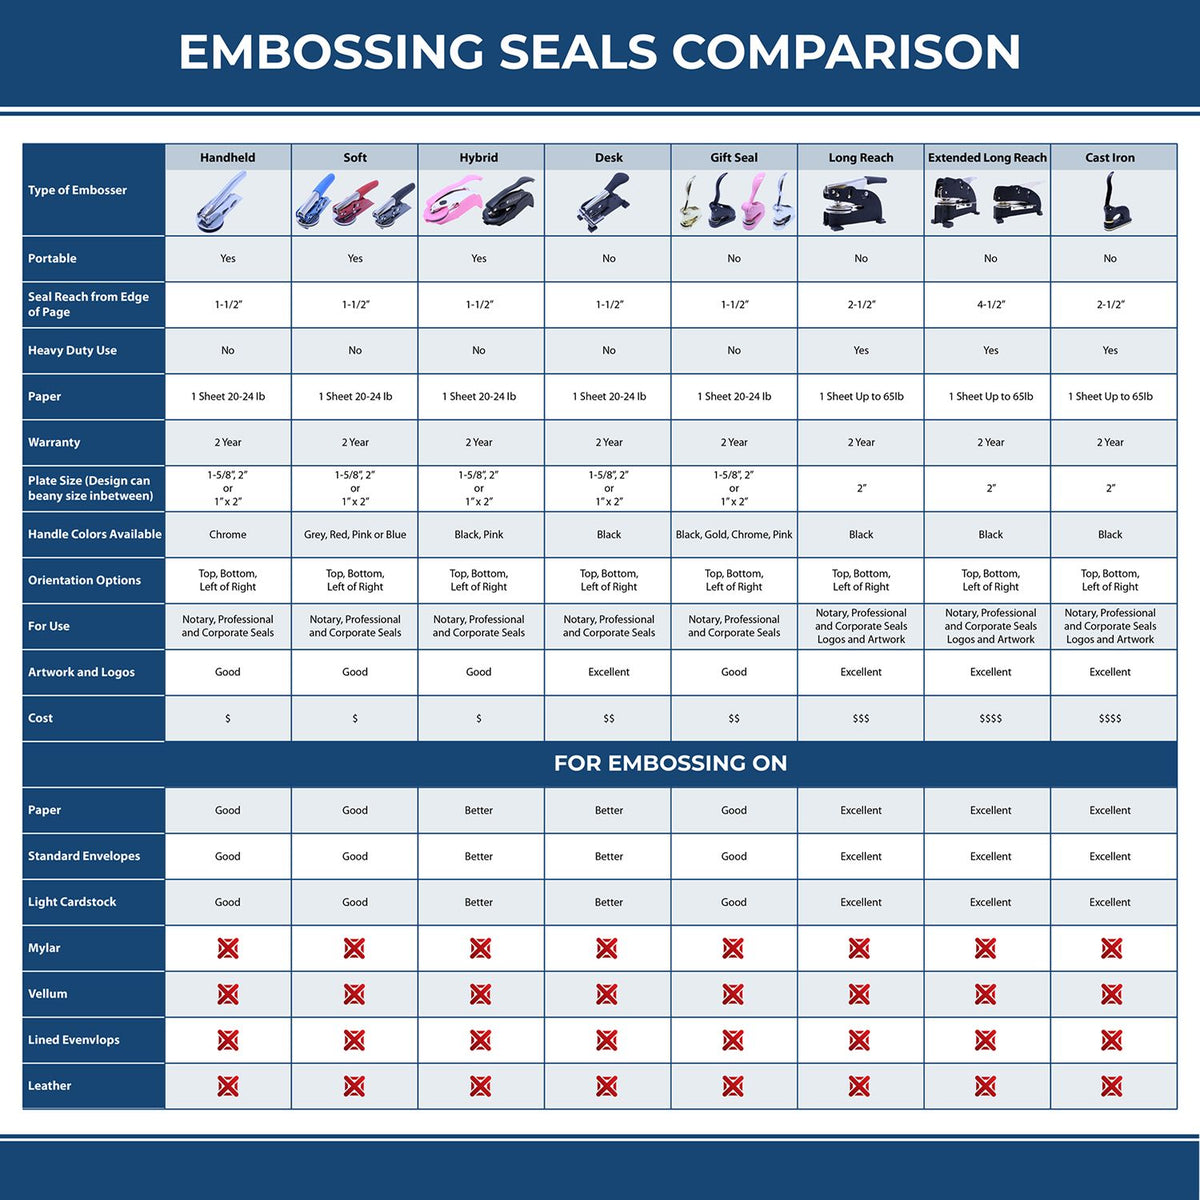 A comparison chart for the different types of mount models available for the Extended Long Reach West Virginia Architect Seal Embosser.